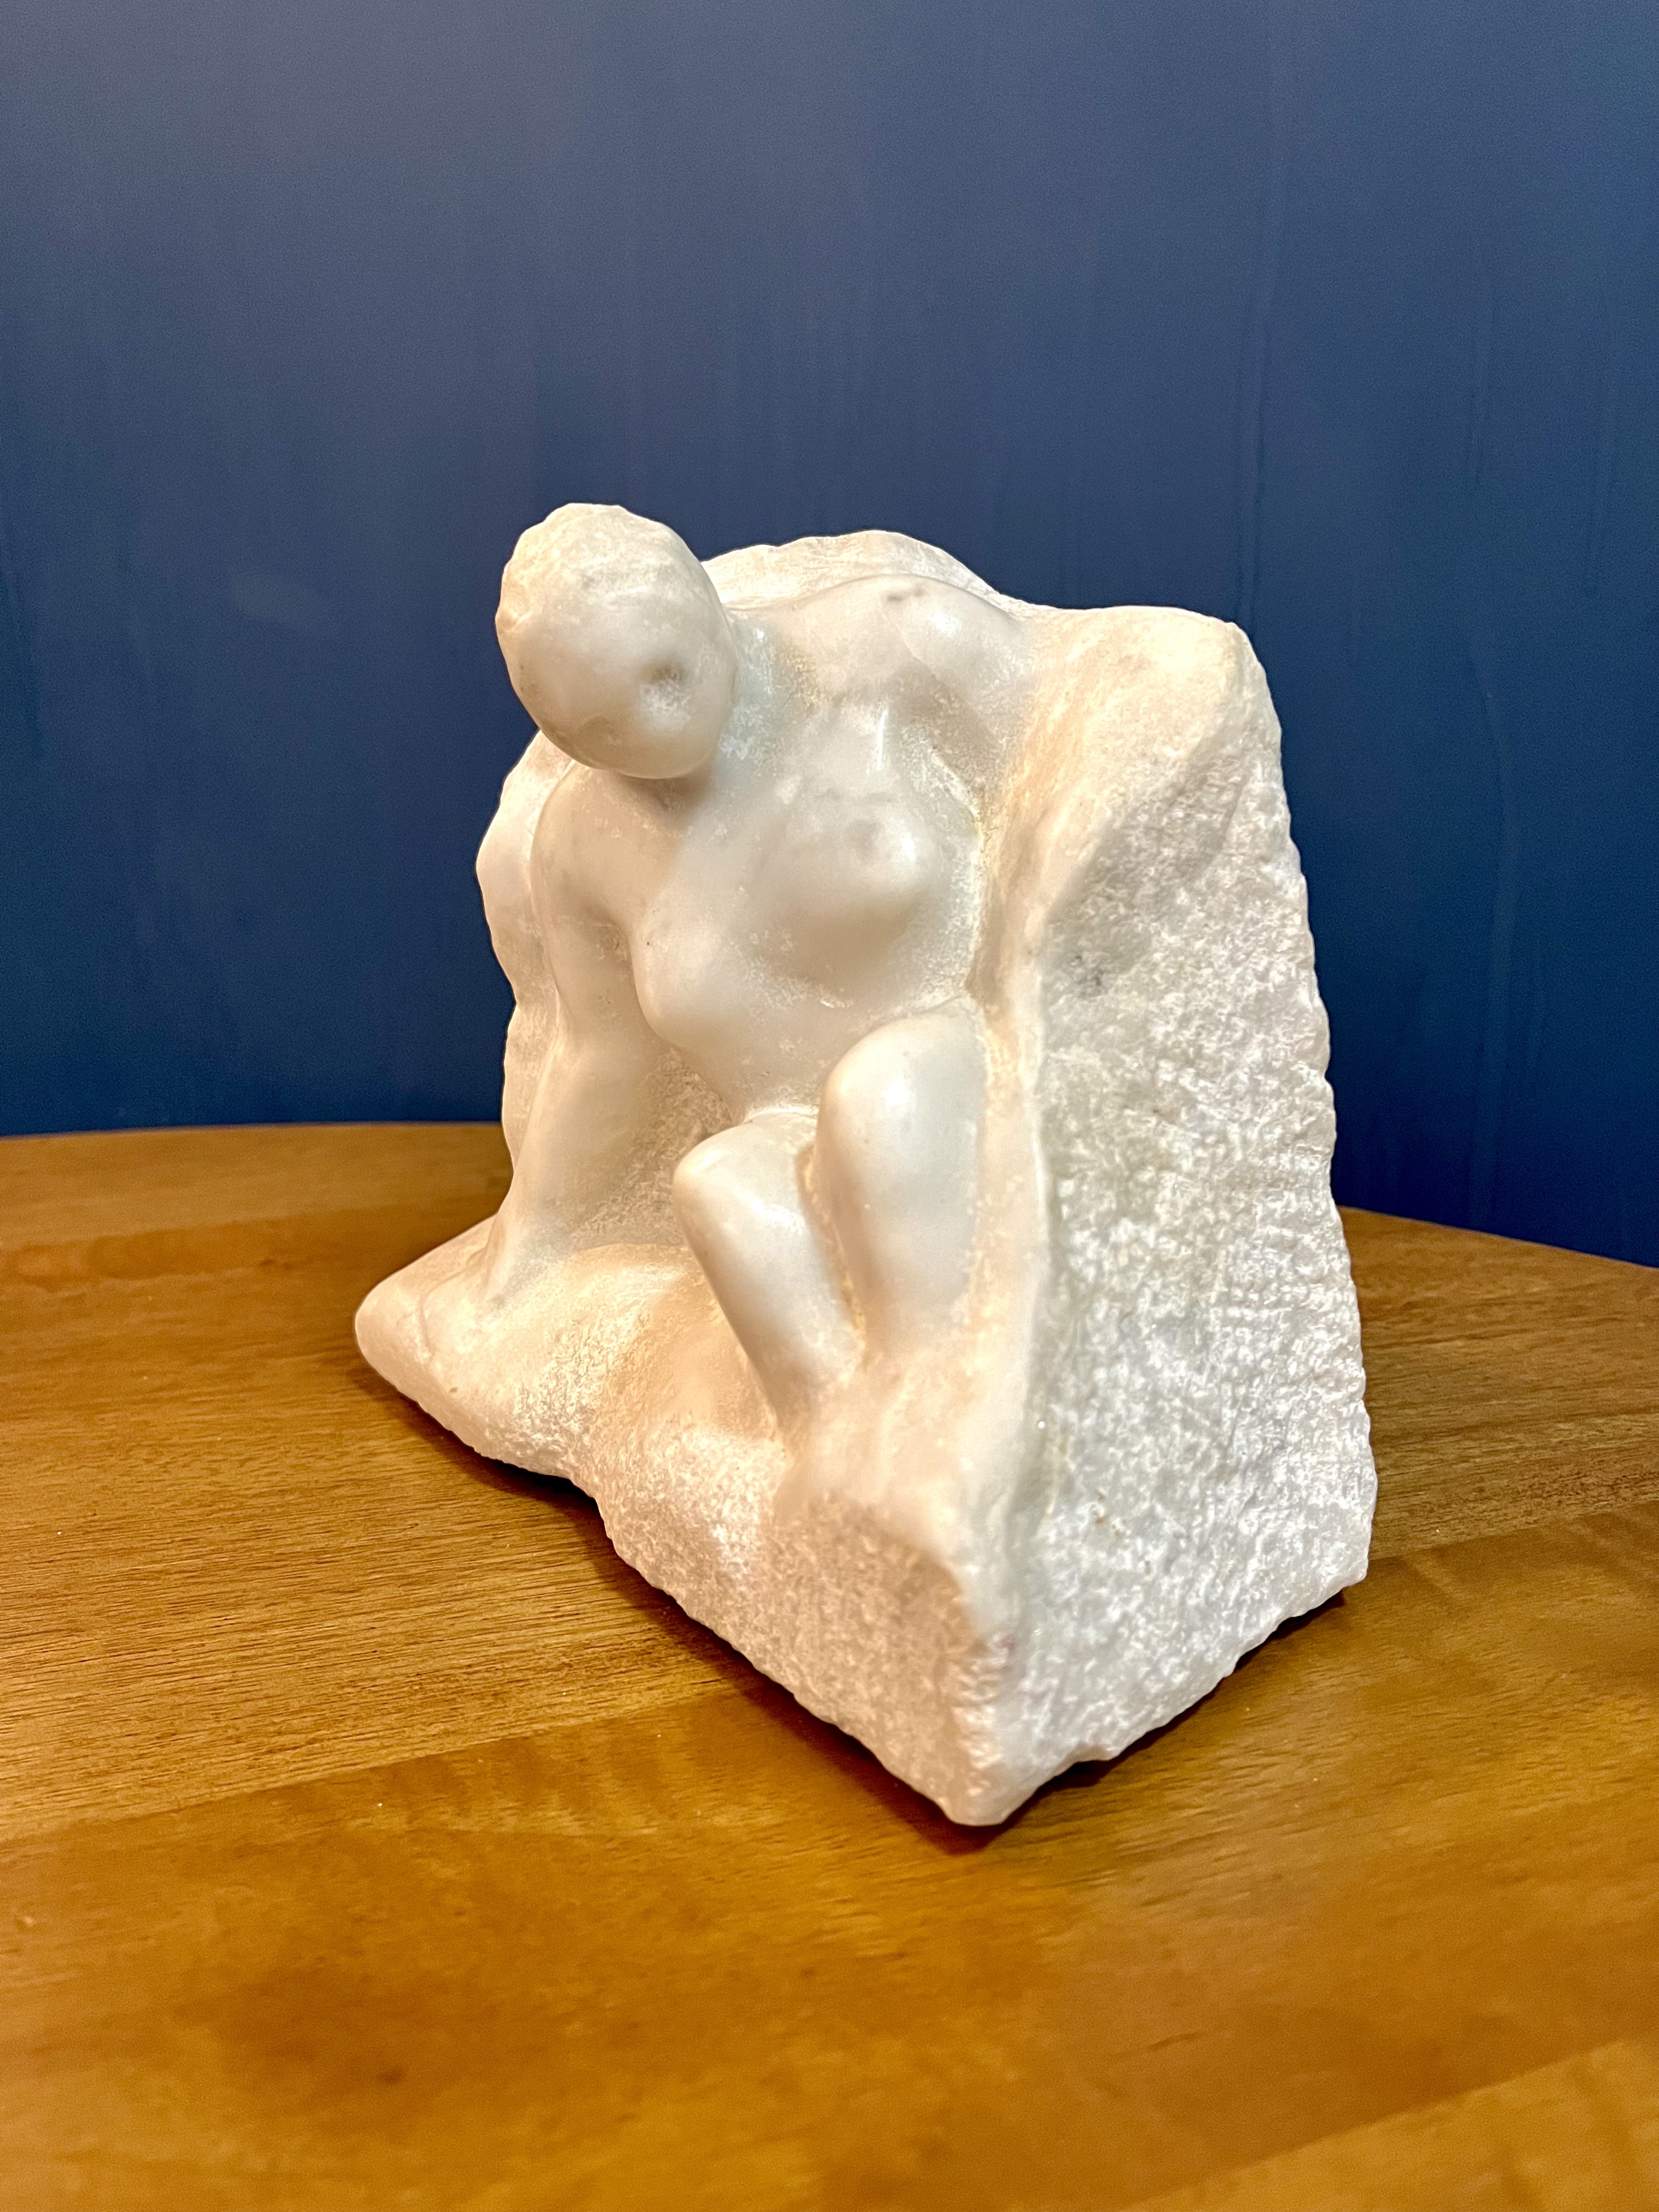 Marcin Biesek: 'Seated Figure', 2011 Stone Sculpture, nudes. Artwork is my reflection on feminism.  I tried to bring the struggles of contemporary women. ...